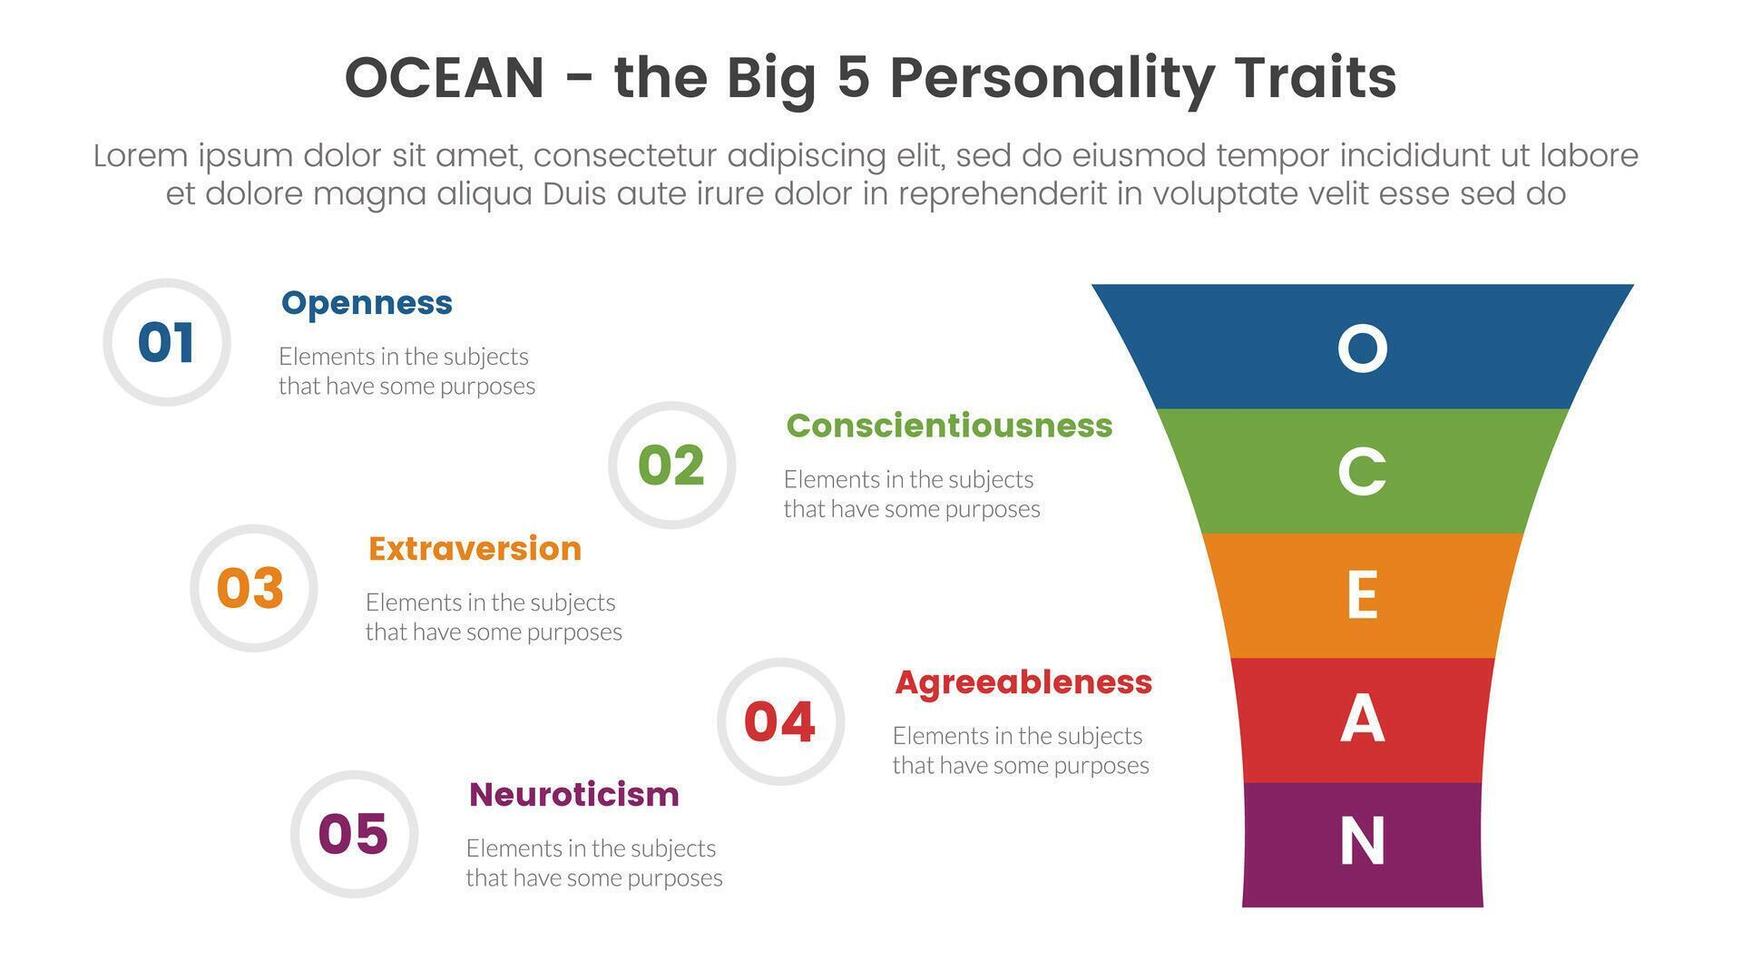 ocean big five personality traits infographic 5 point stage template with funnel shrink v shape concept for slide presentation vector